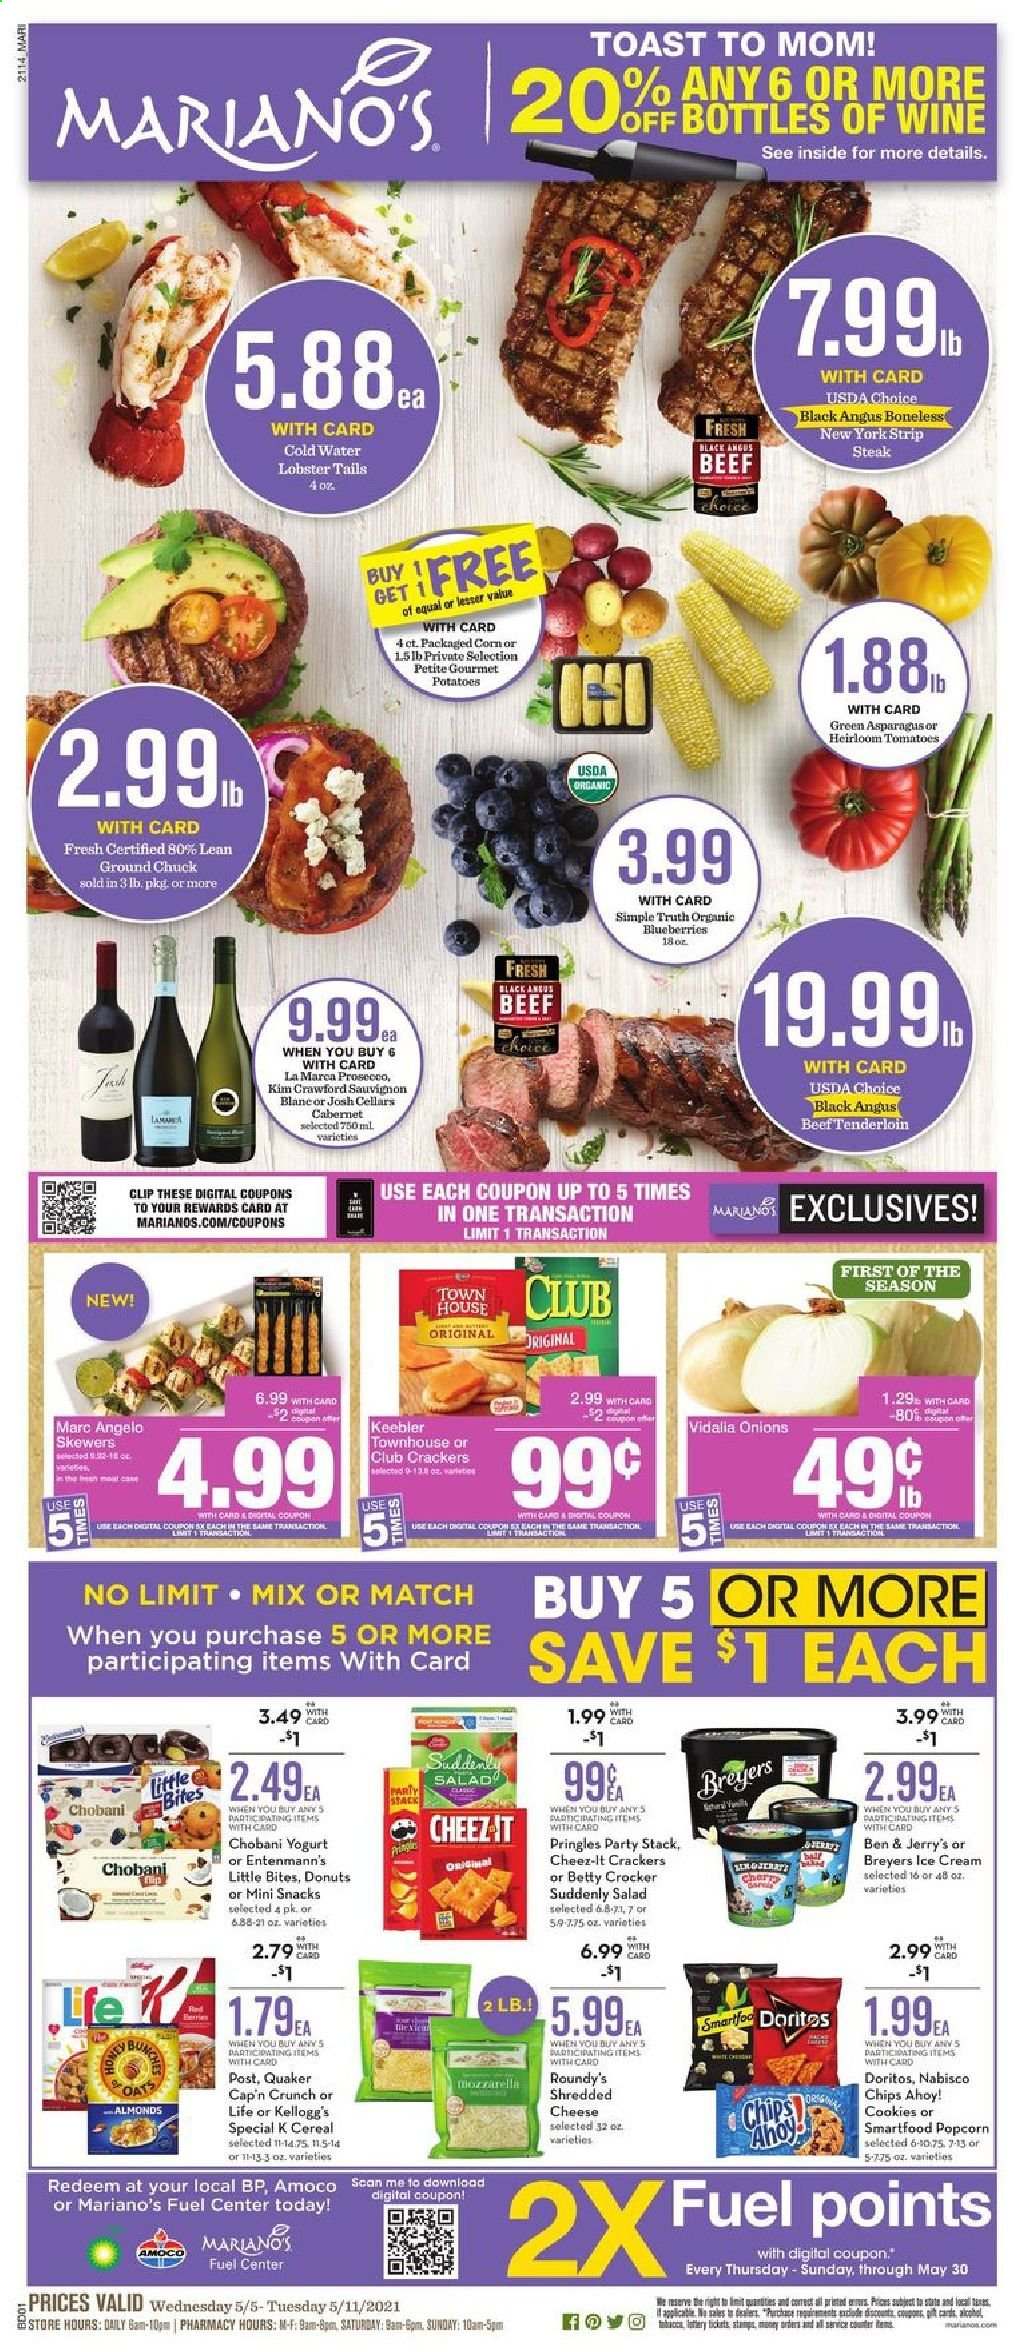 thumbnail - Mariano’s Flyer - 05/05/2021 - 05/11/2021 - Sales products - donut, Entenmann's, asparagus, corn, tomatoes, potatoes, onion, salad, blueberries, cherries, lobster, lobster tail, Quaker, yoghurt, Chobani, ice cream, Ben & Jerry's, cookies, snack, crackers, Kellogg's, Chips Ahoy!, Little Bites, Keebler, Doritos, Pringles, chips, Smartfood, popcorn, Cheez-It, cereals, Cap'n Crunch, almonds, white wine, wine, alcohol, Sauvignon Blanc, beef meat, ground chuck, steak, beef tenderloin, striploin steak. Page 1.